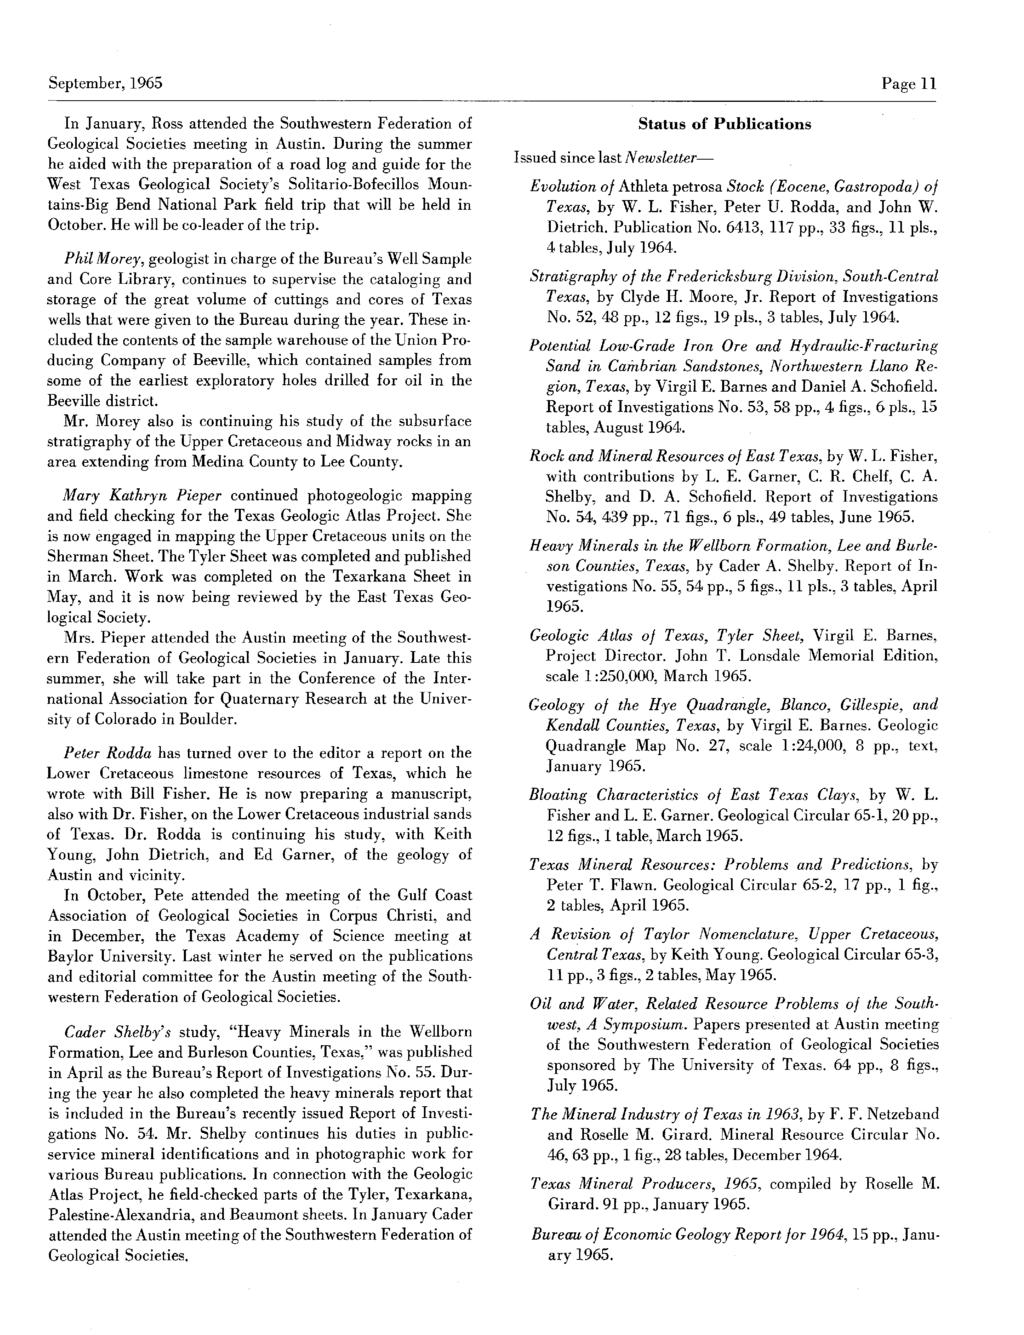 September,1965 Page 11 In January, Ross attended the Southwestern Federation of Geological Societies meeting in Austin.